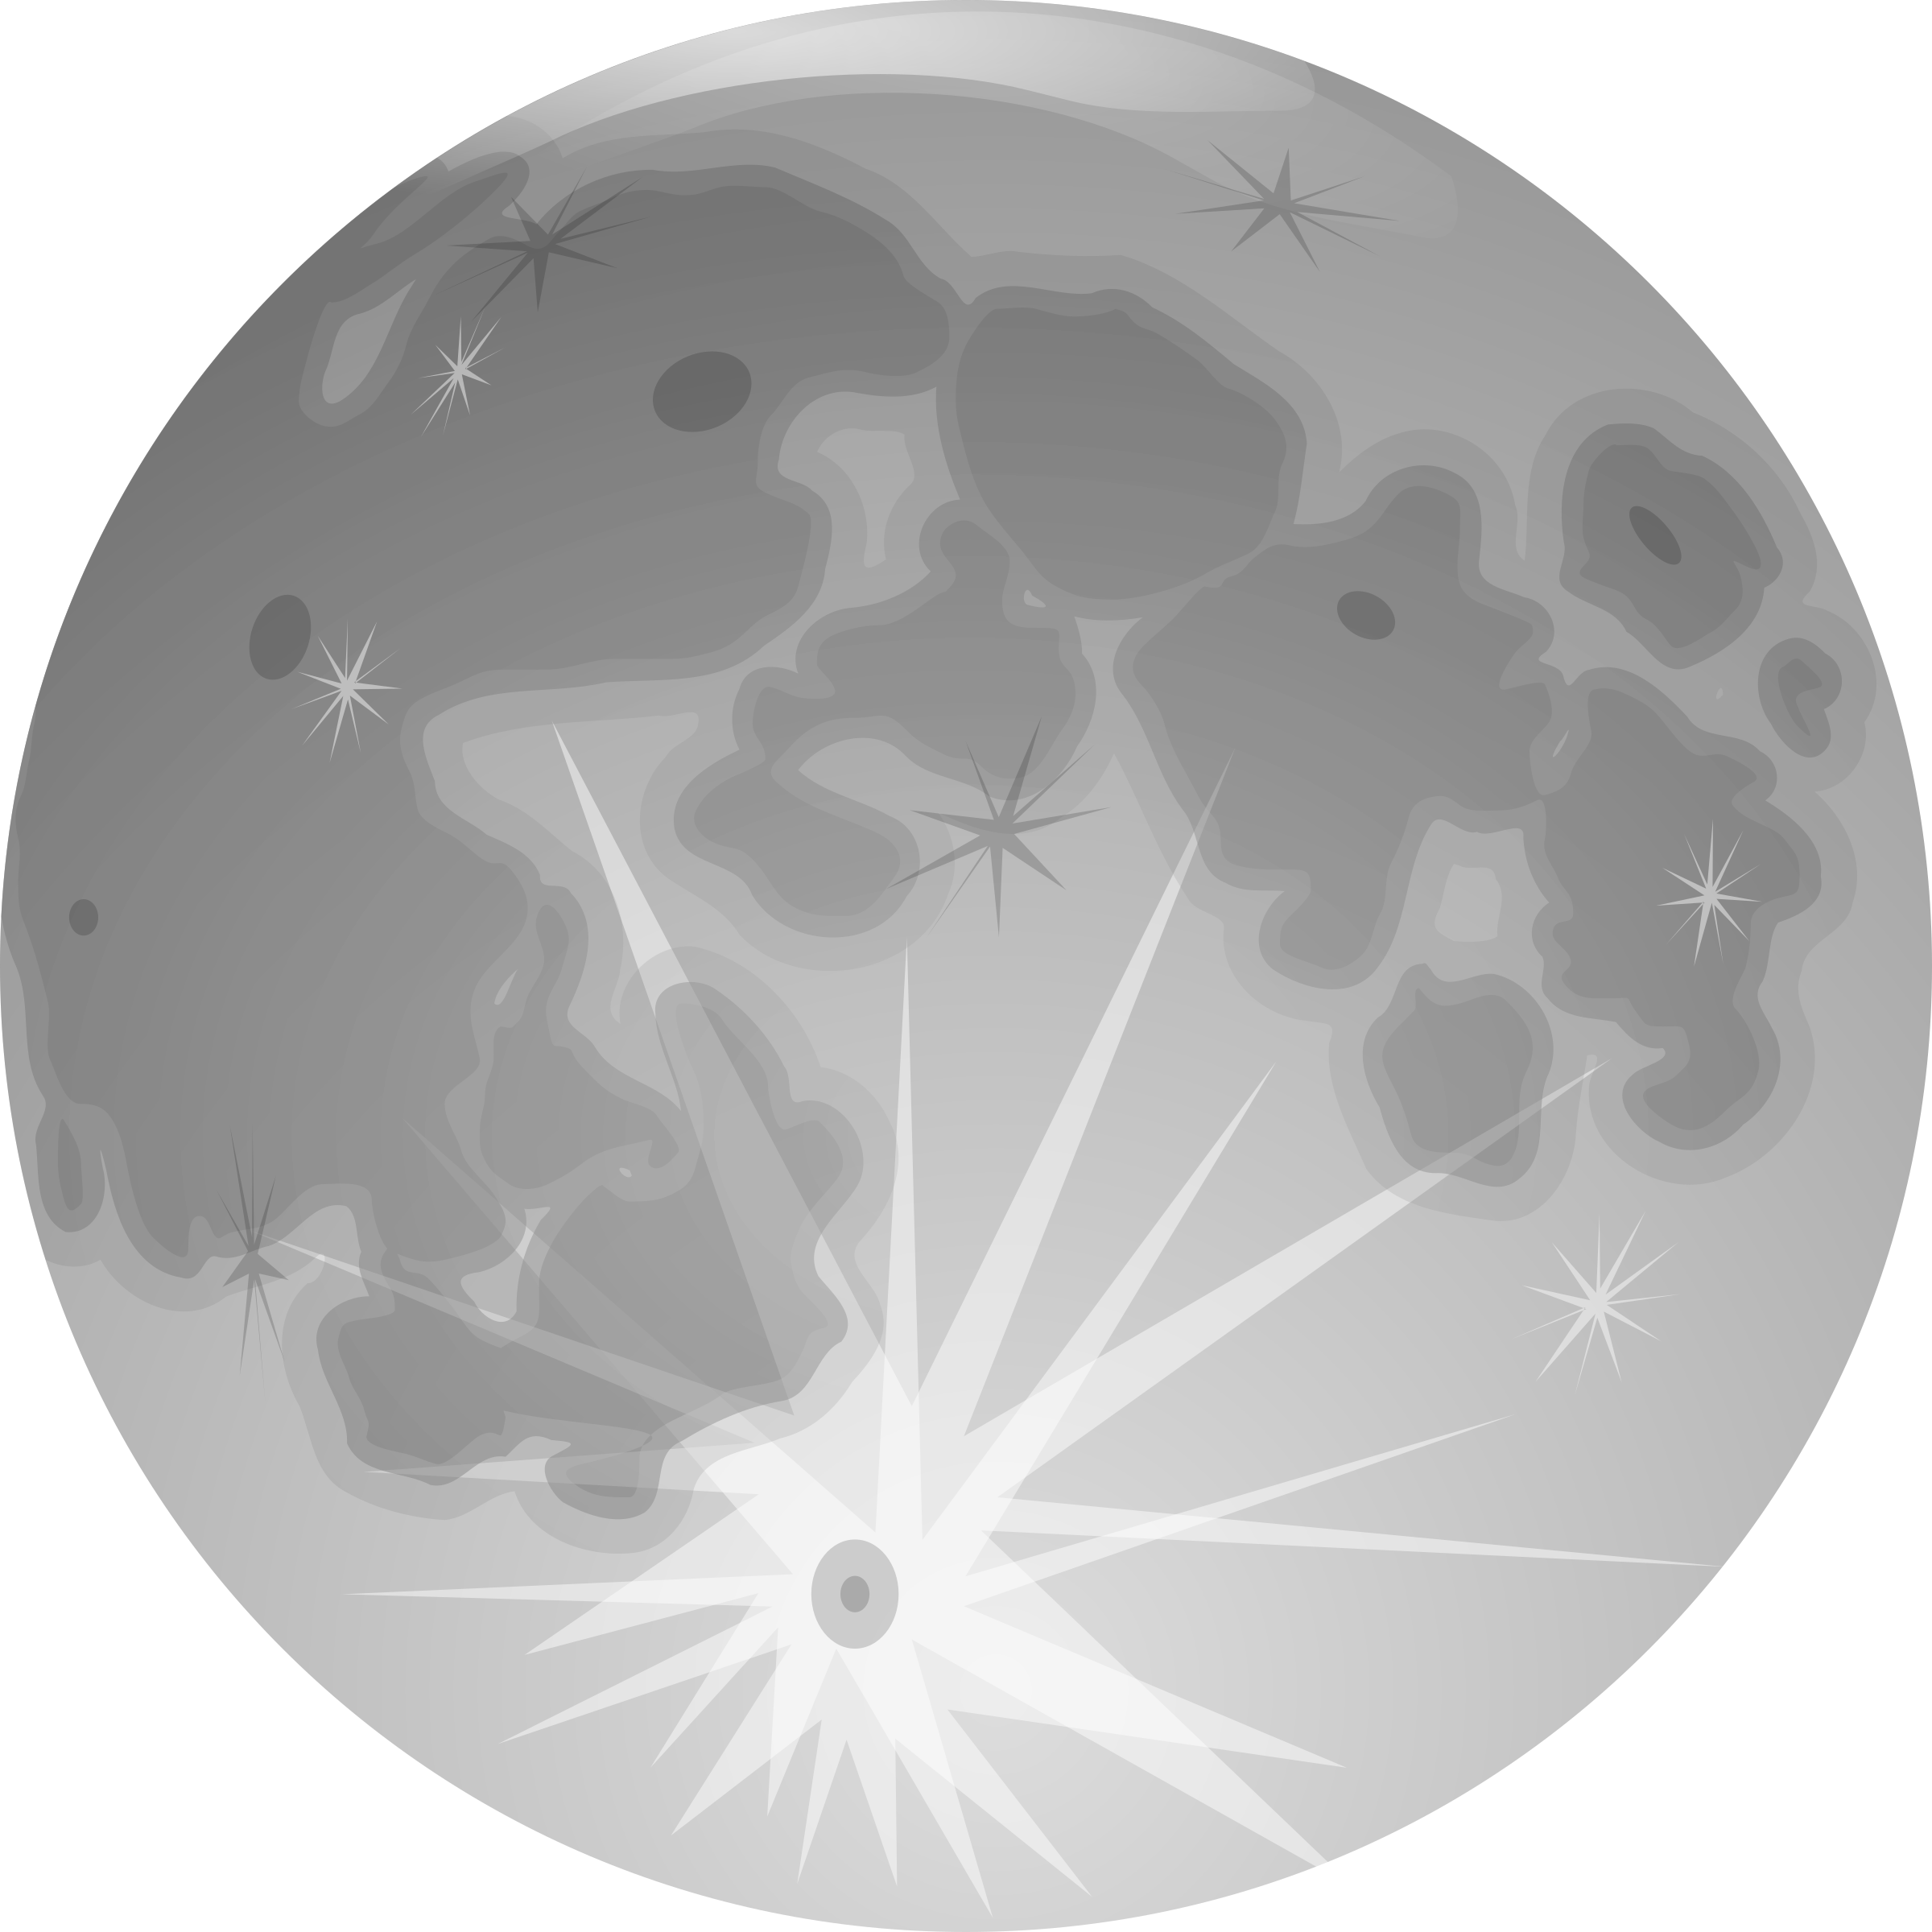 Moon PNG Vector Images with Transparent background - TransparentPNG